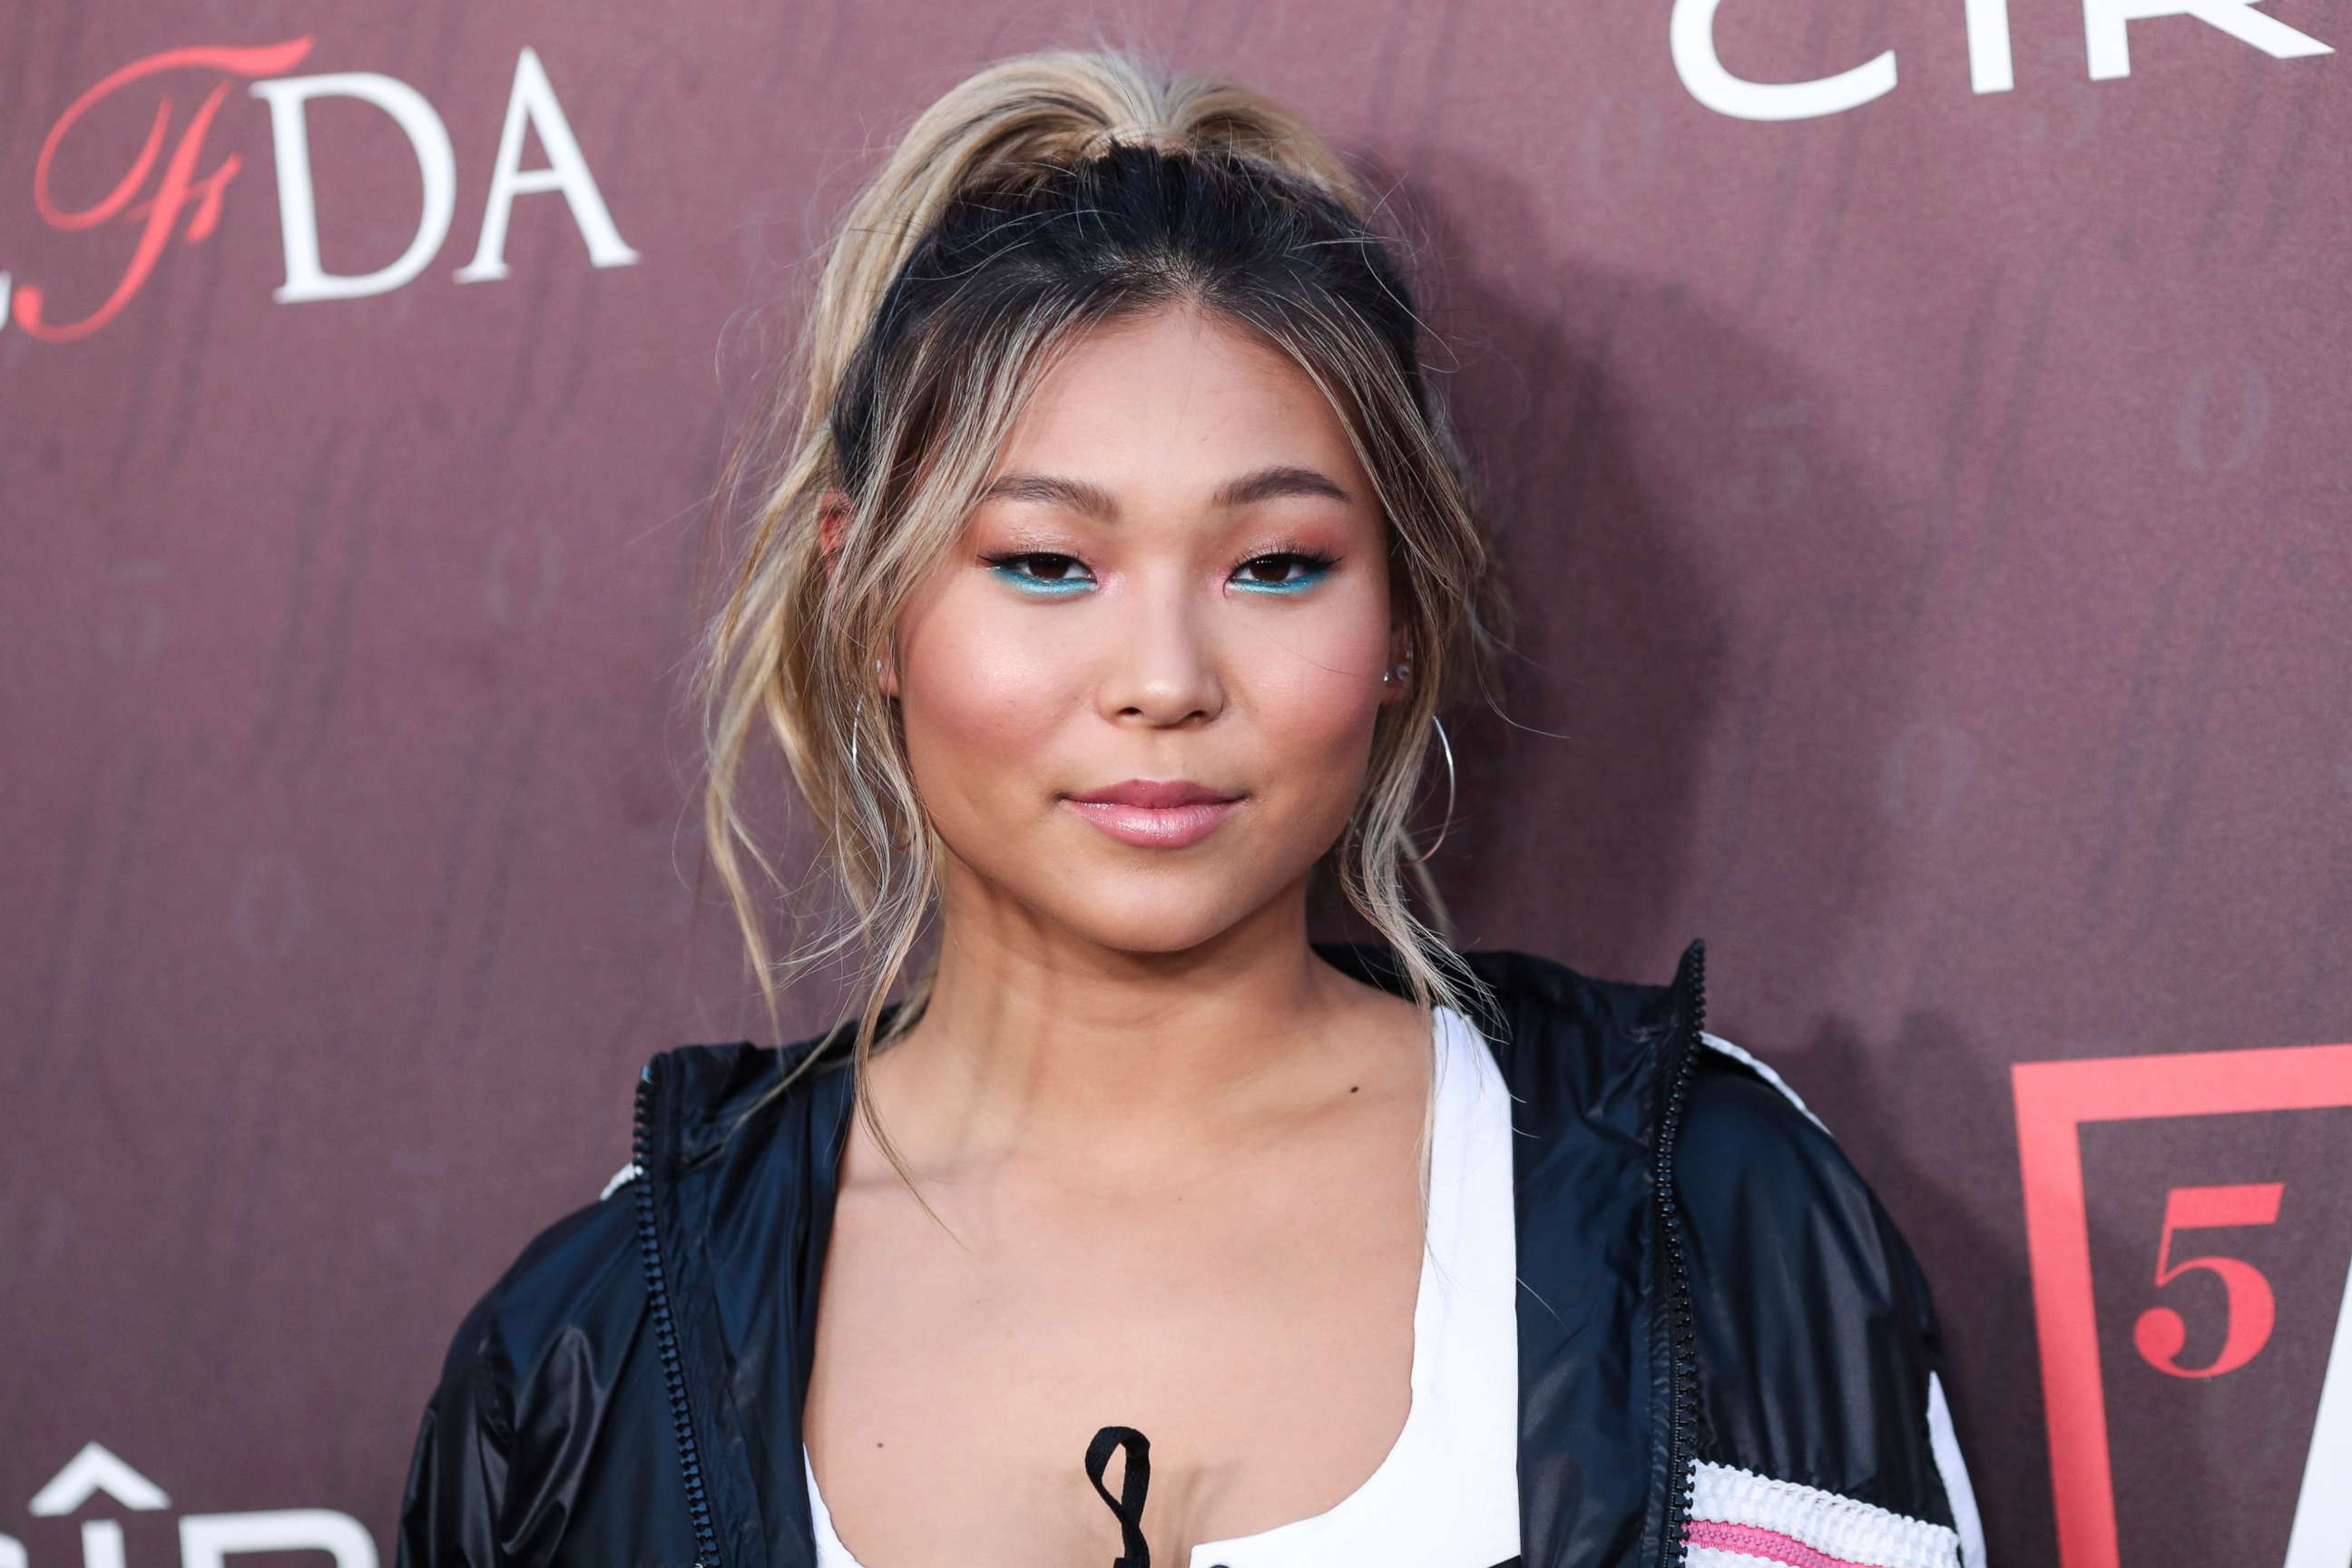 PHOTO: Chloe Kim arrives at the Sports Illustrated Fashionable 50 held at Sunset Room Hollywood, July 18, 2019, in Hollywood, Calif.